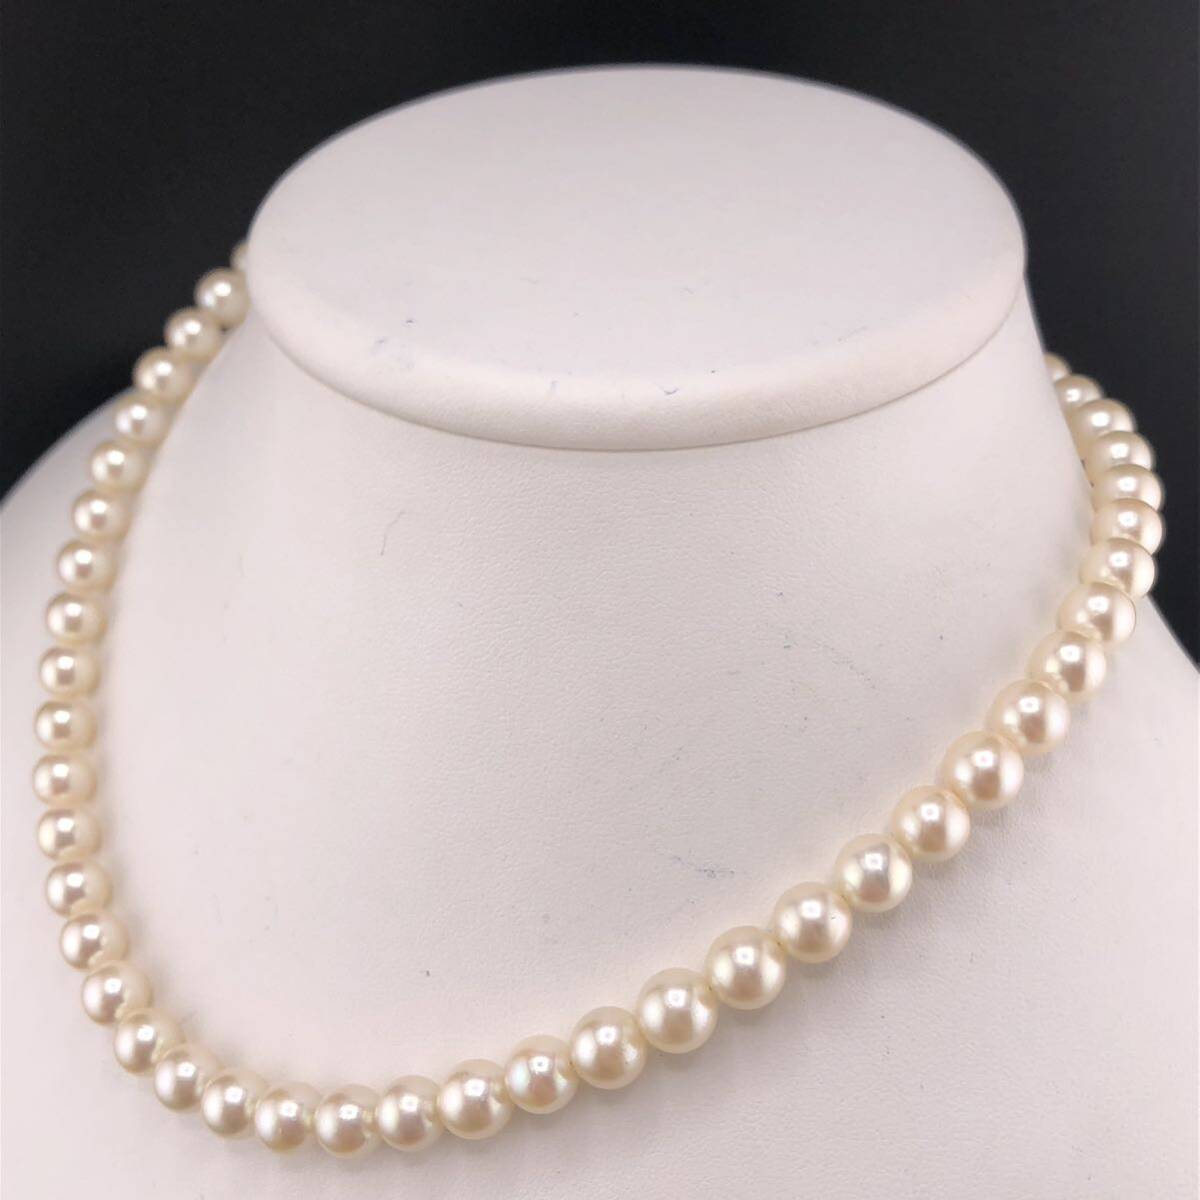 E04-3054☆☆ アコヤパールネックレス 7.5mm~7.7mm 41cm 37.8g ( アコヤ真珠 Pearl necklace SILVER )の画像2